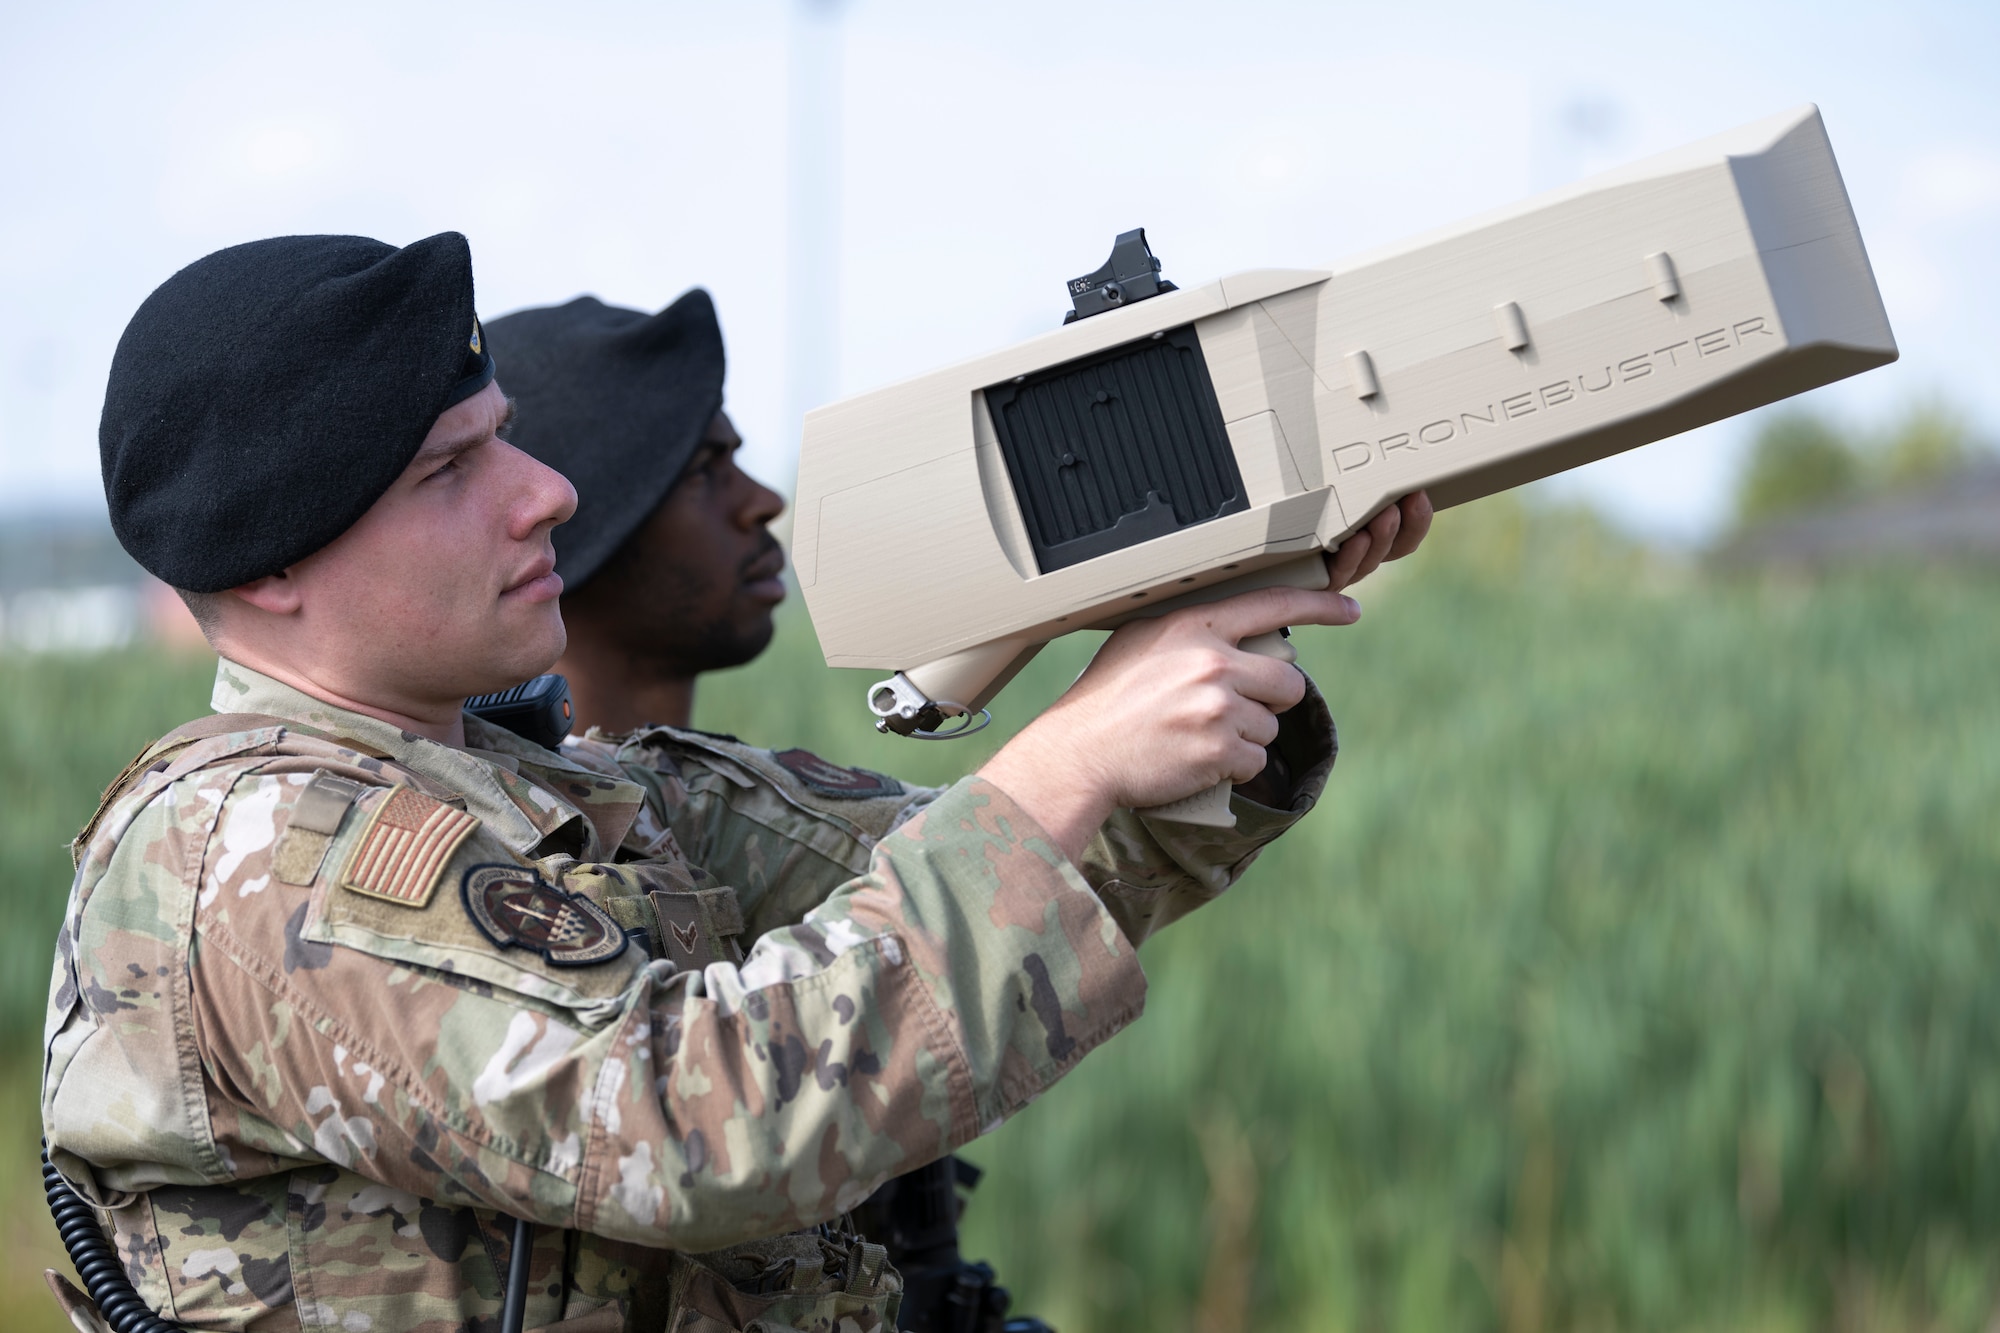 Security Forces demonstrate Dronebuster.